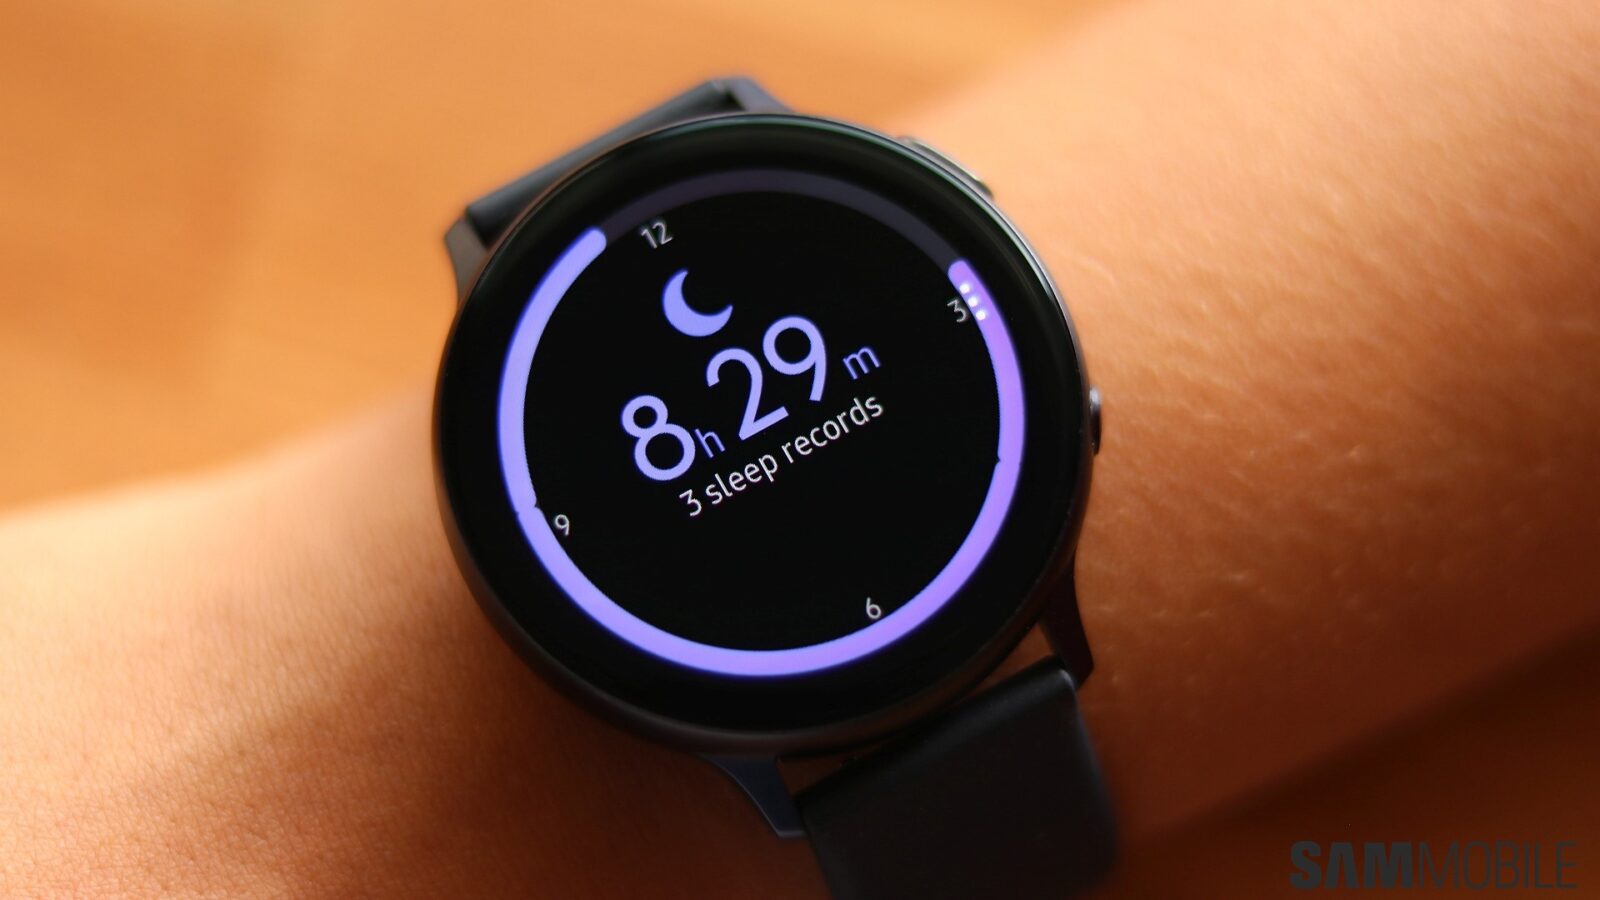 Samsung is now manufacturing smartwatches and fitness bands in Brazil ...